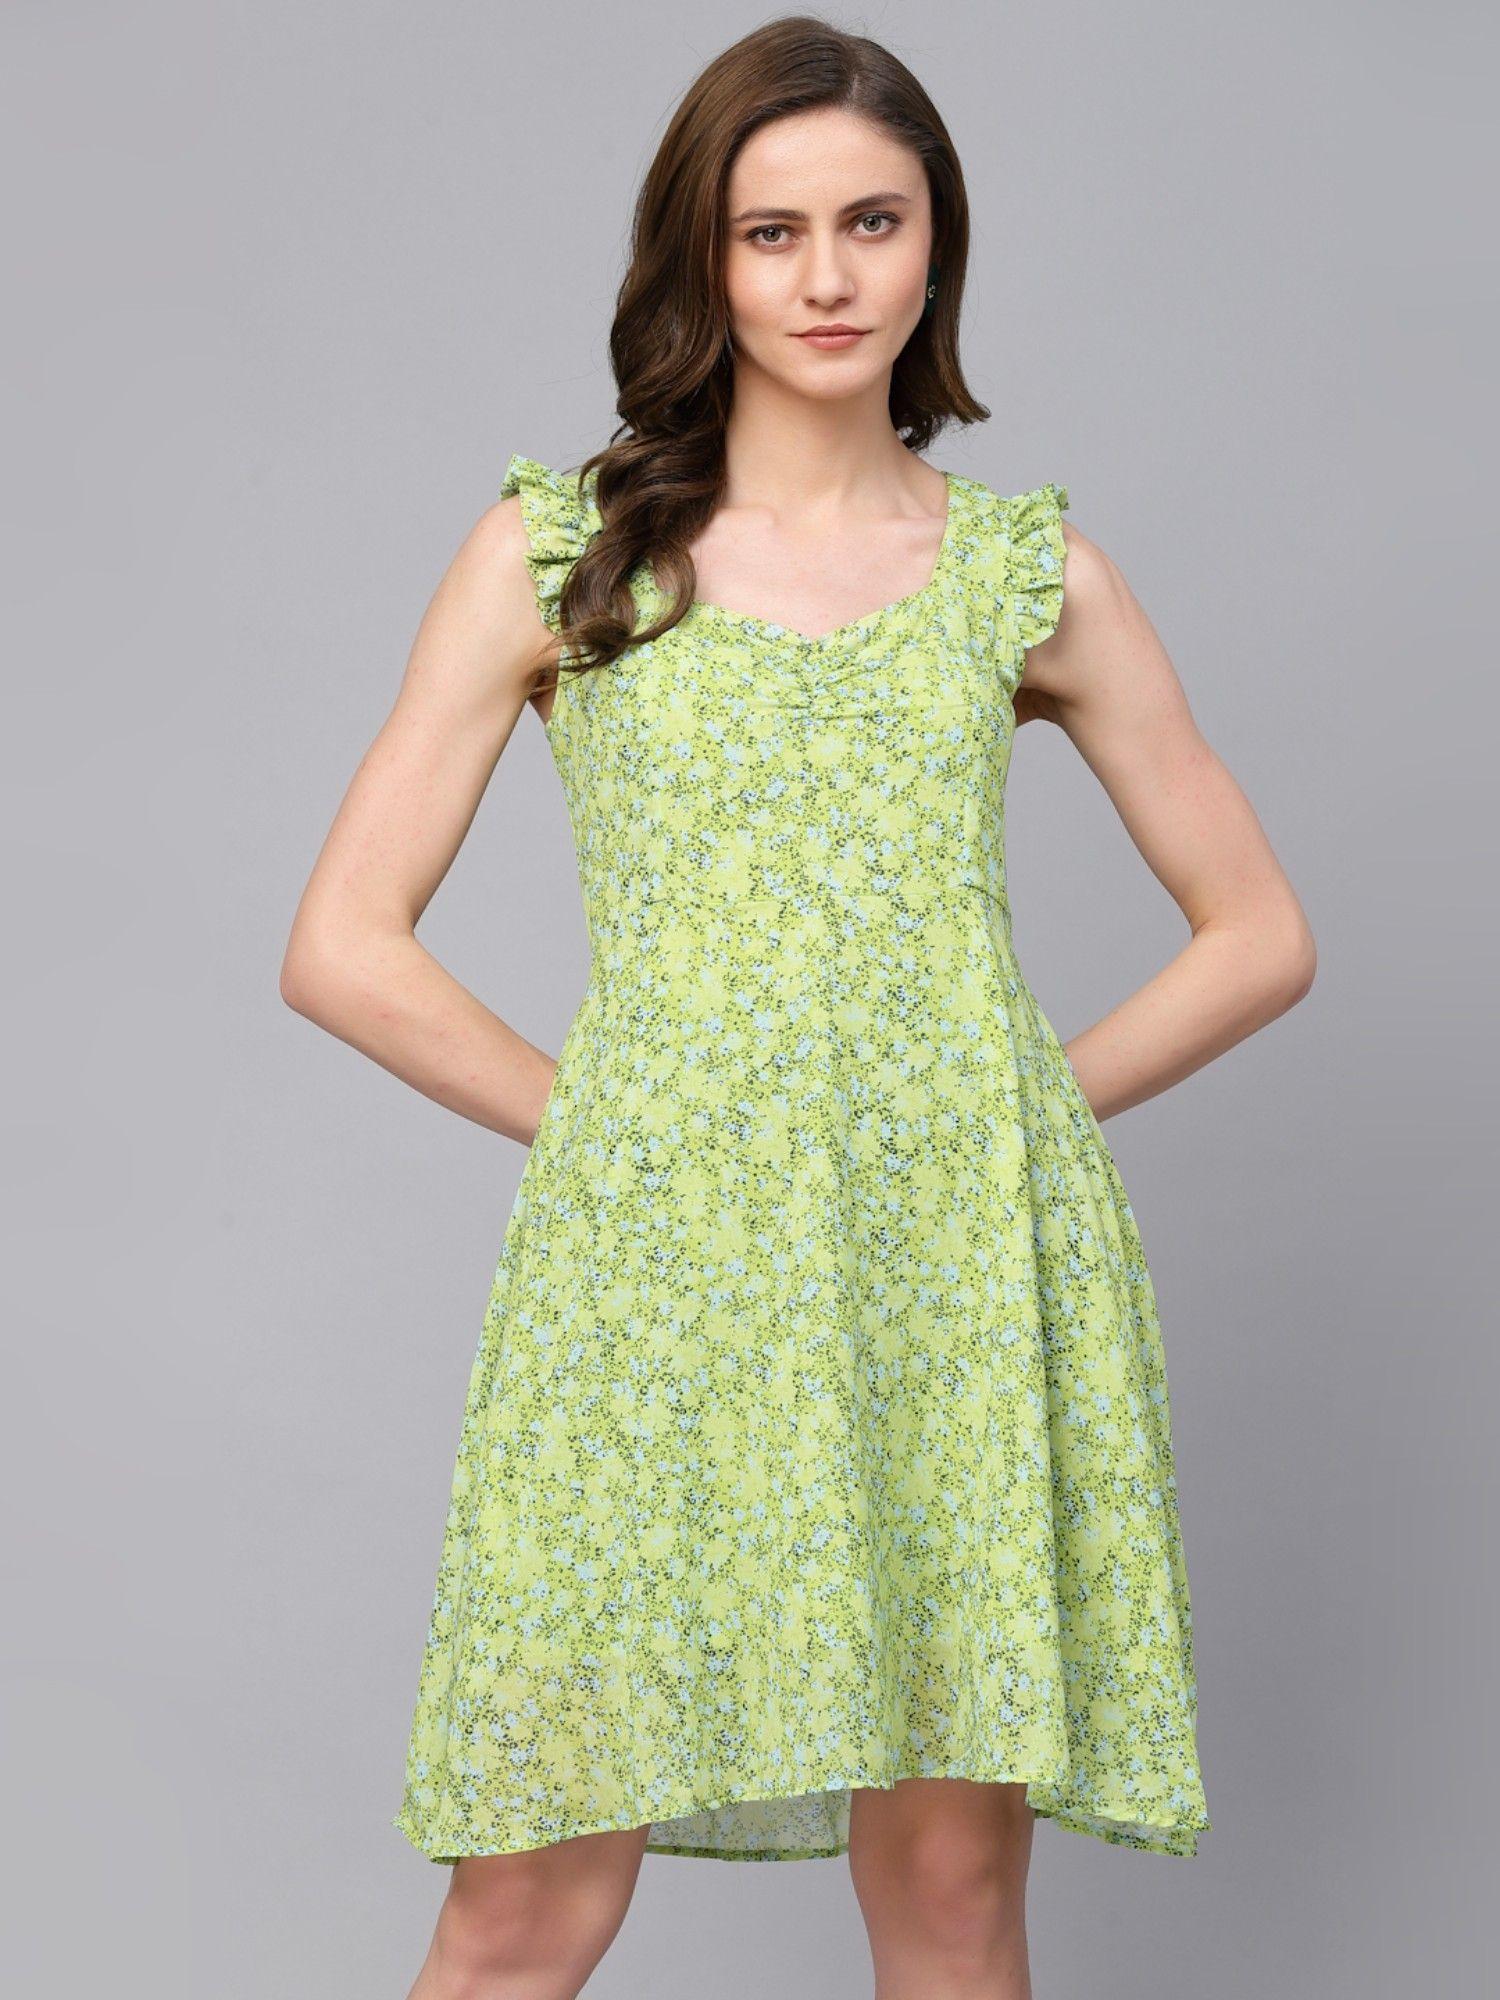 casual green synthetics dress for women